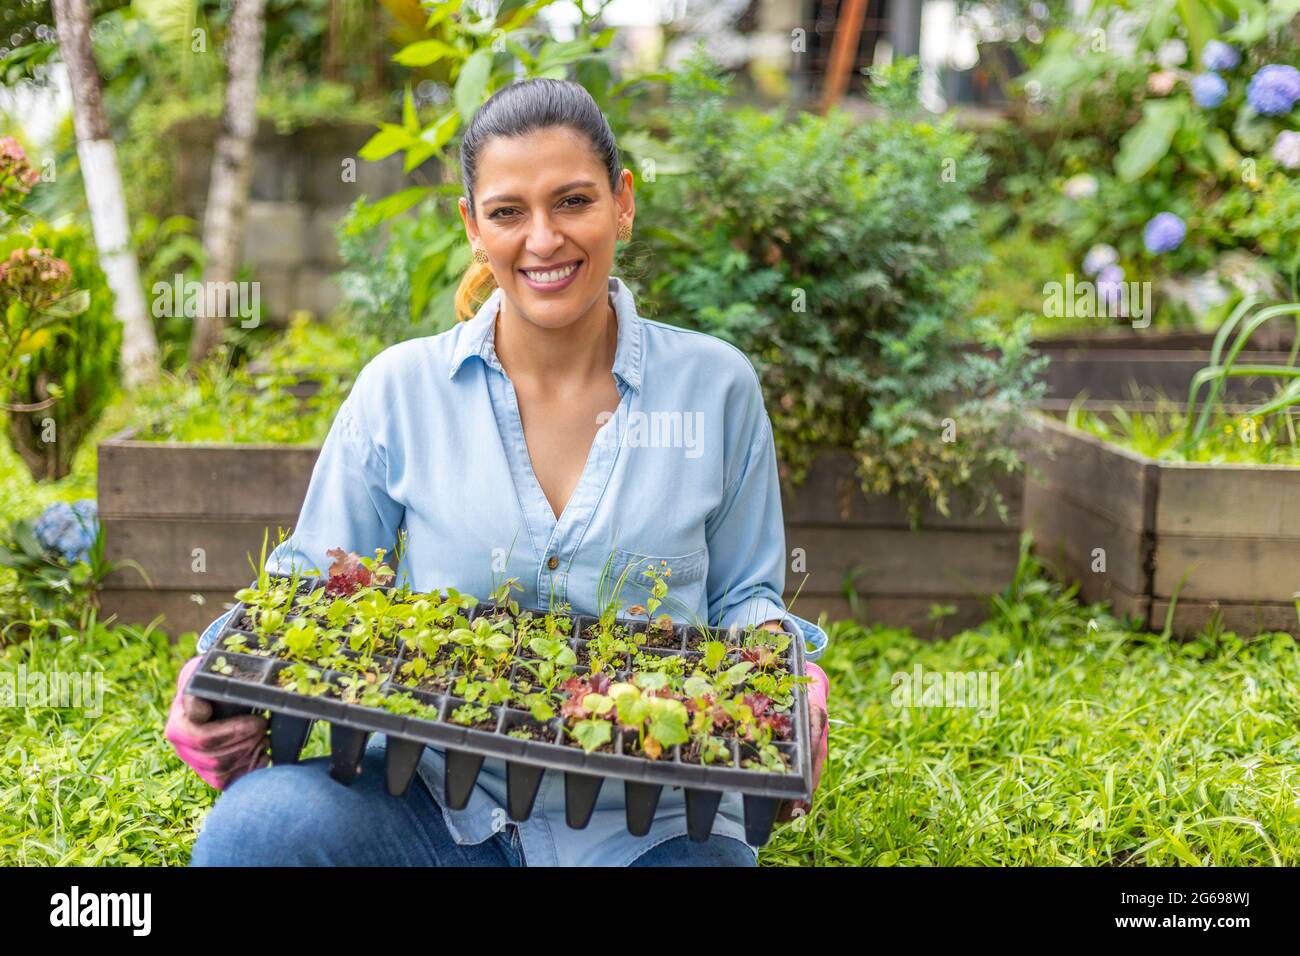 woman sitting in her garden with germination tray Stock Photo